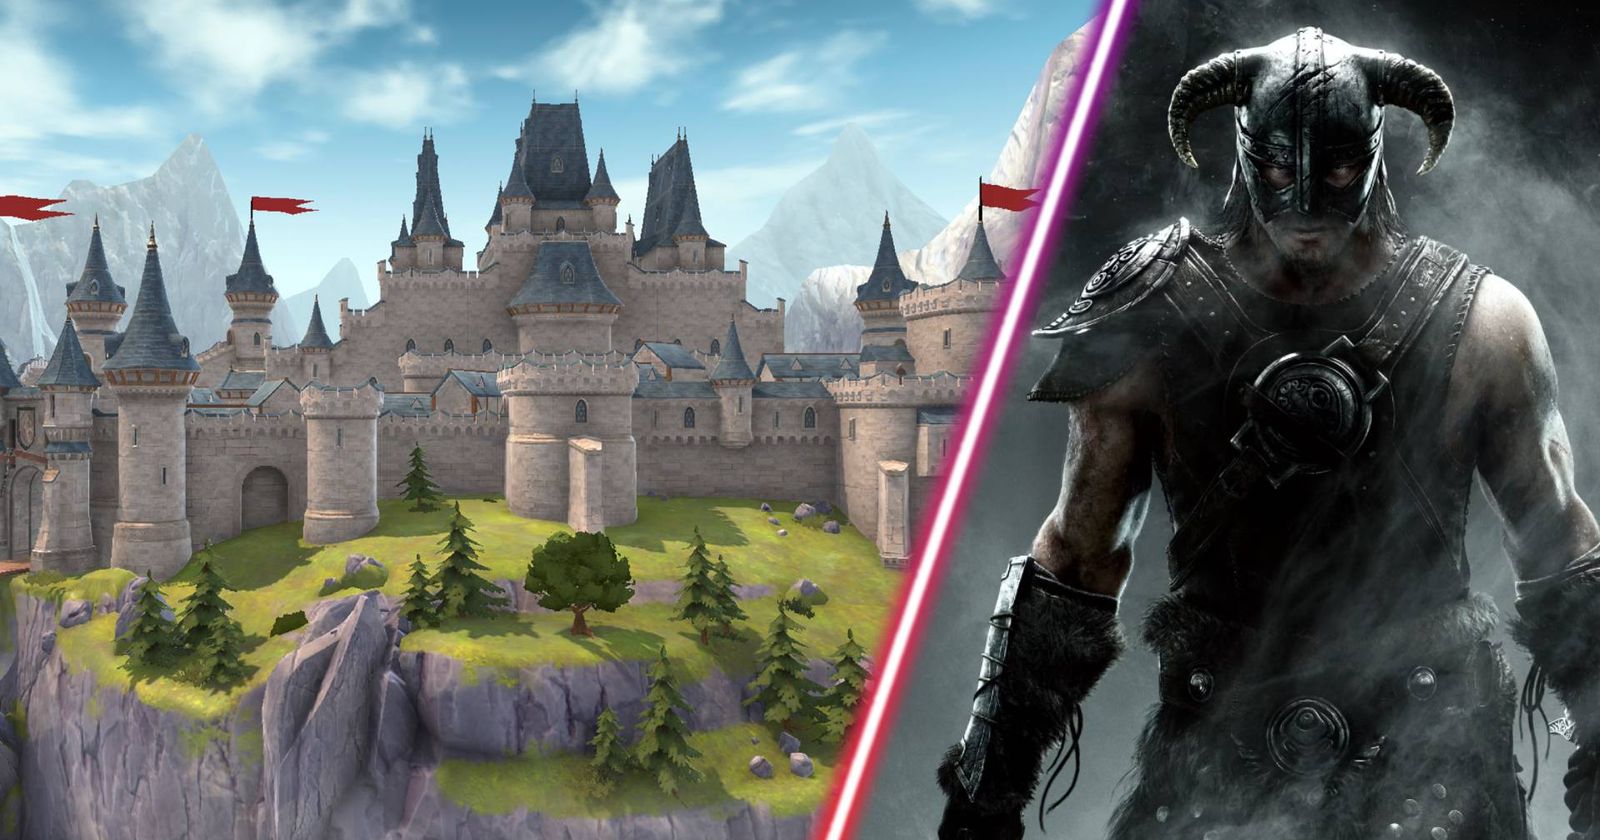 Simulation game The Elder Scrolls: Castles now available in Early